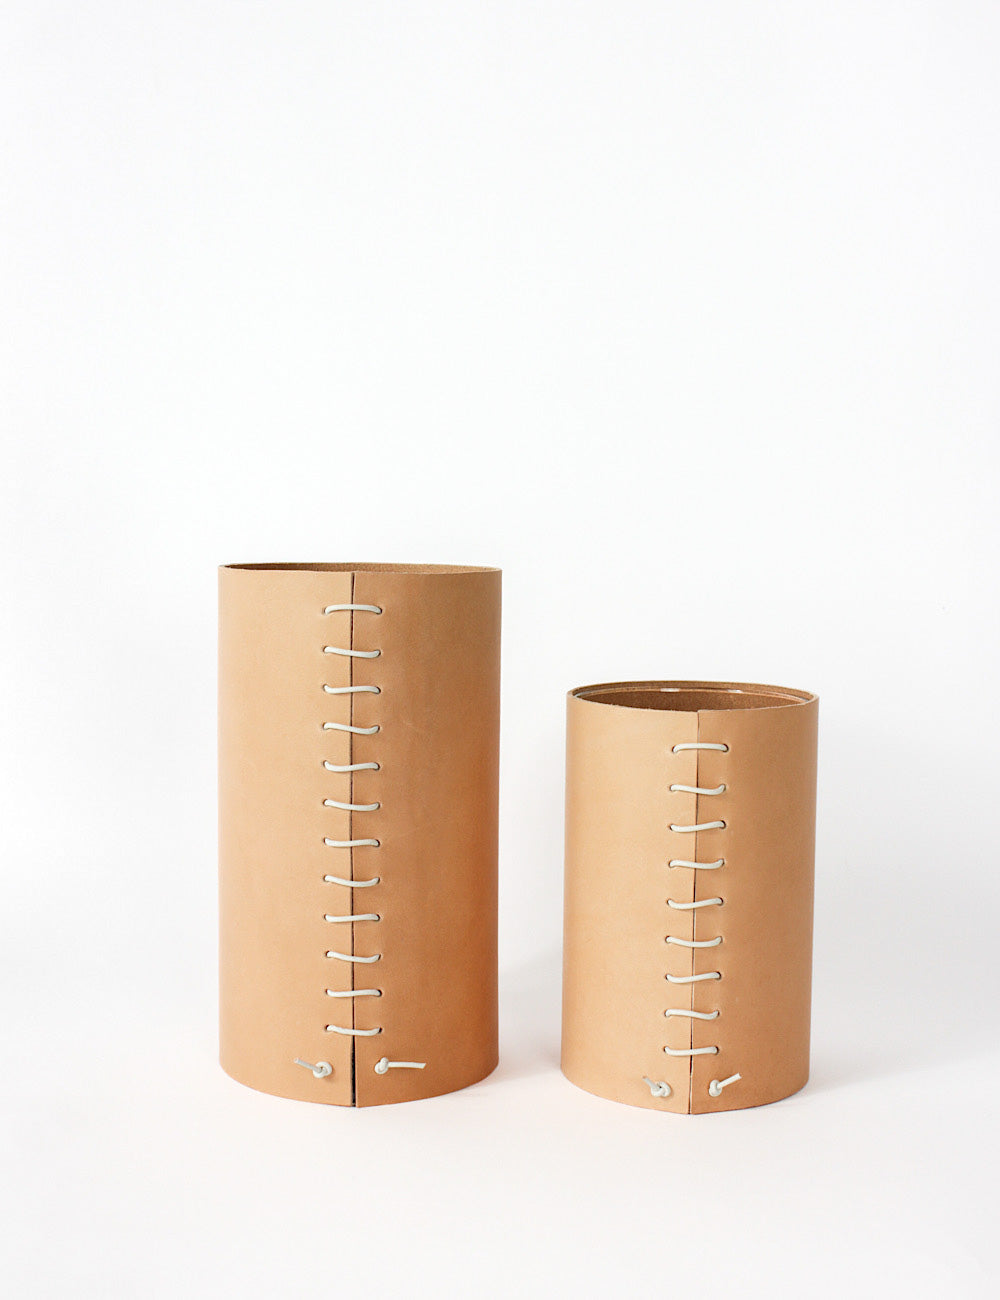 Two Leather Wrapped vases, one small, one medium. Cylindrical in shape, with a leather stitched detailing going down the middle where both leather ends meet. 